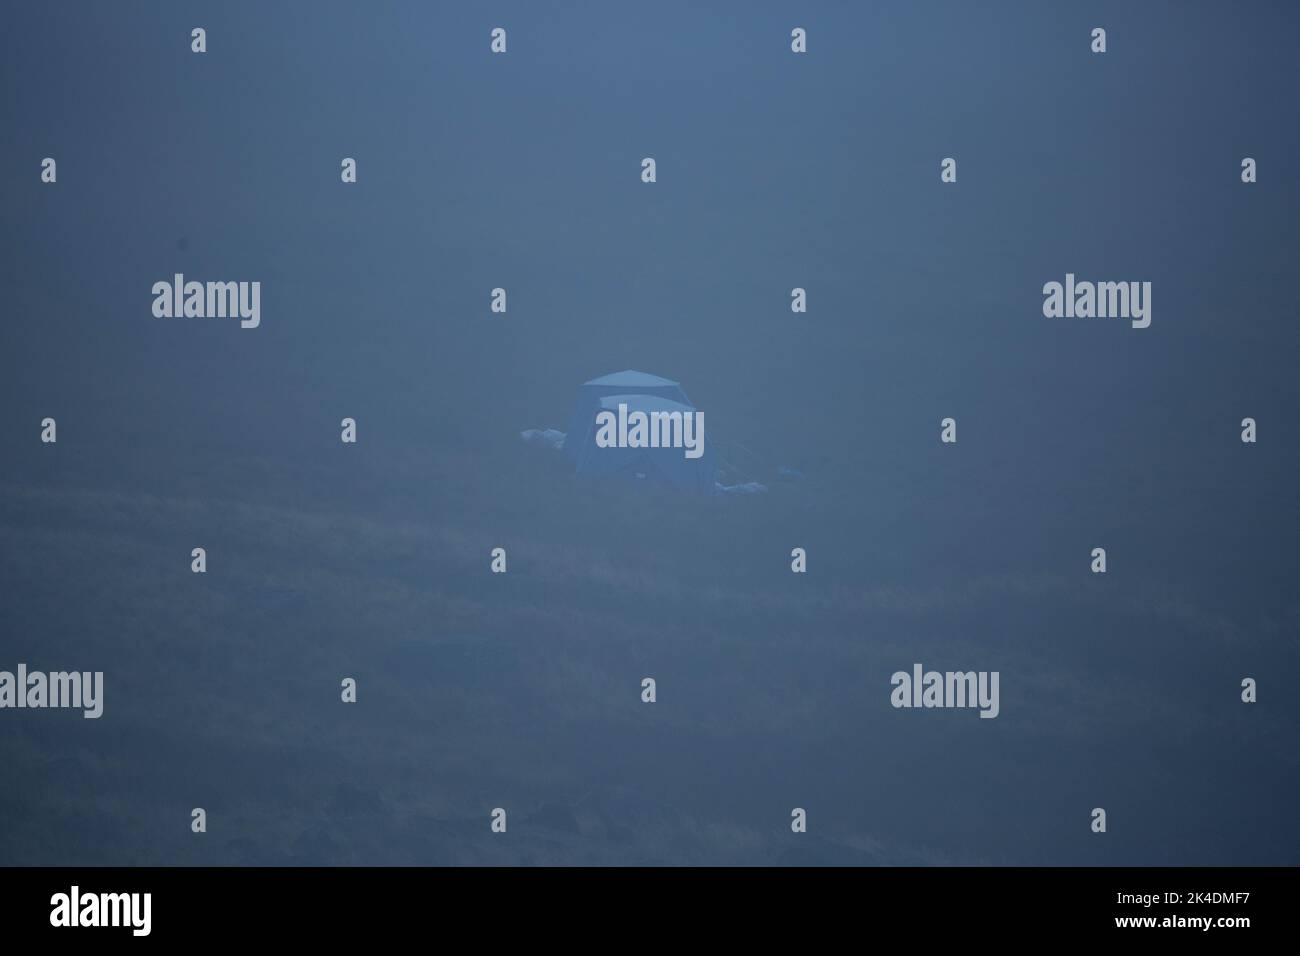 Saddleworth, Oldham, UK. 2nd October, 2022. Police continue to search for human remains on Saddleworth Moor in relation to the Moors Murders. Peter Liggins/Alamy Live News Stock Photo